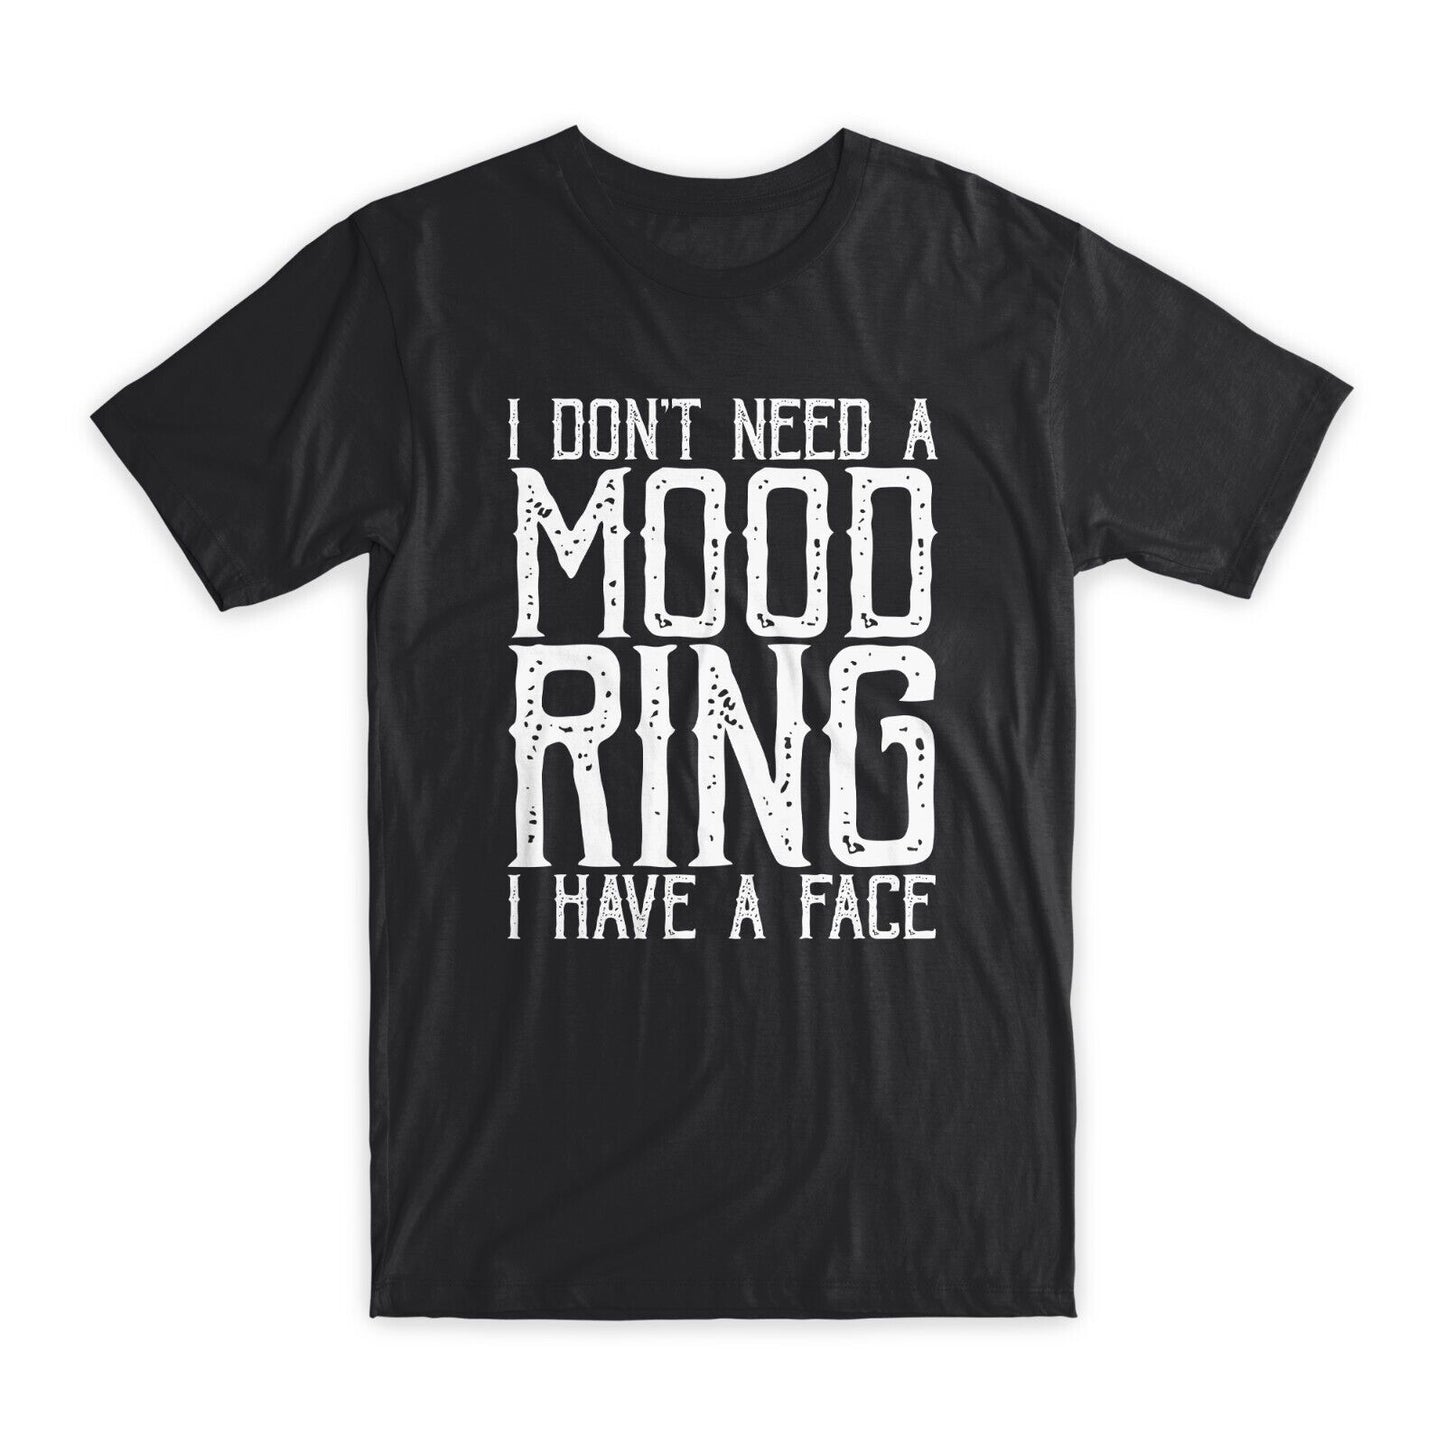 I Don't Need A Mood Ring I Have A Face T-Shirt Premium Cotton Funny Tee Gift NEW